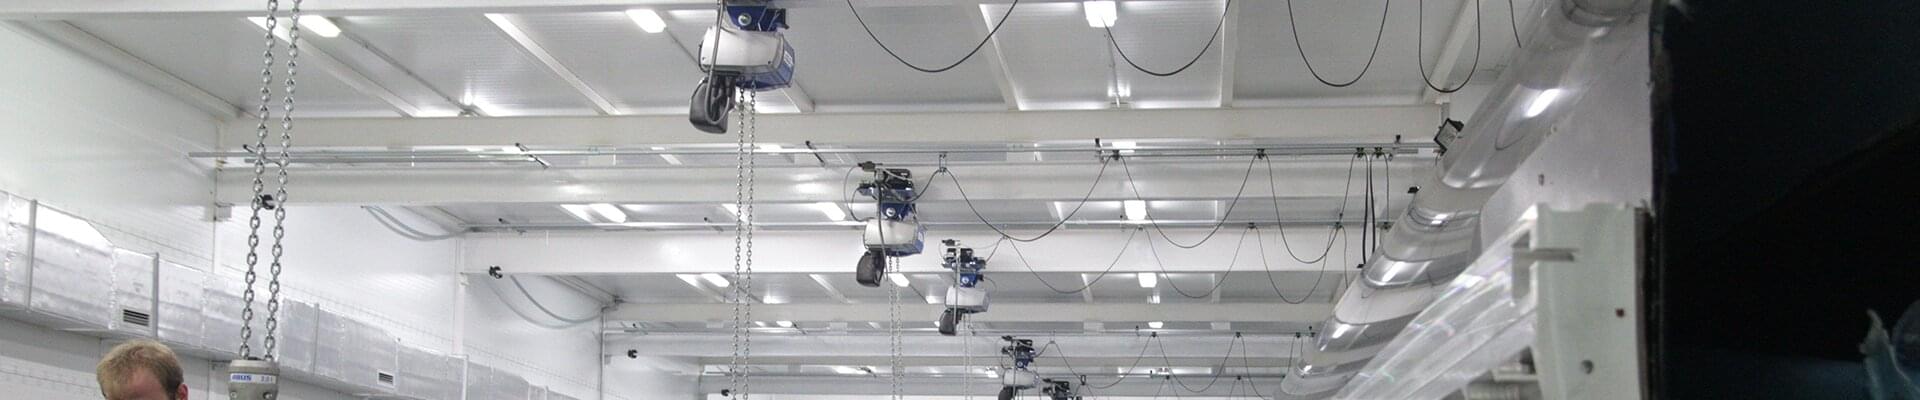 ABUS chain hoists for optimising the handling processes of the company FUTURE FIBRES